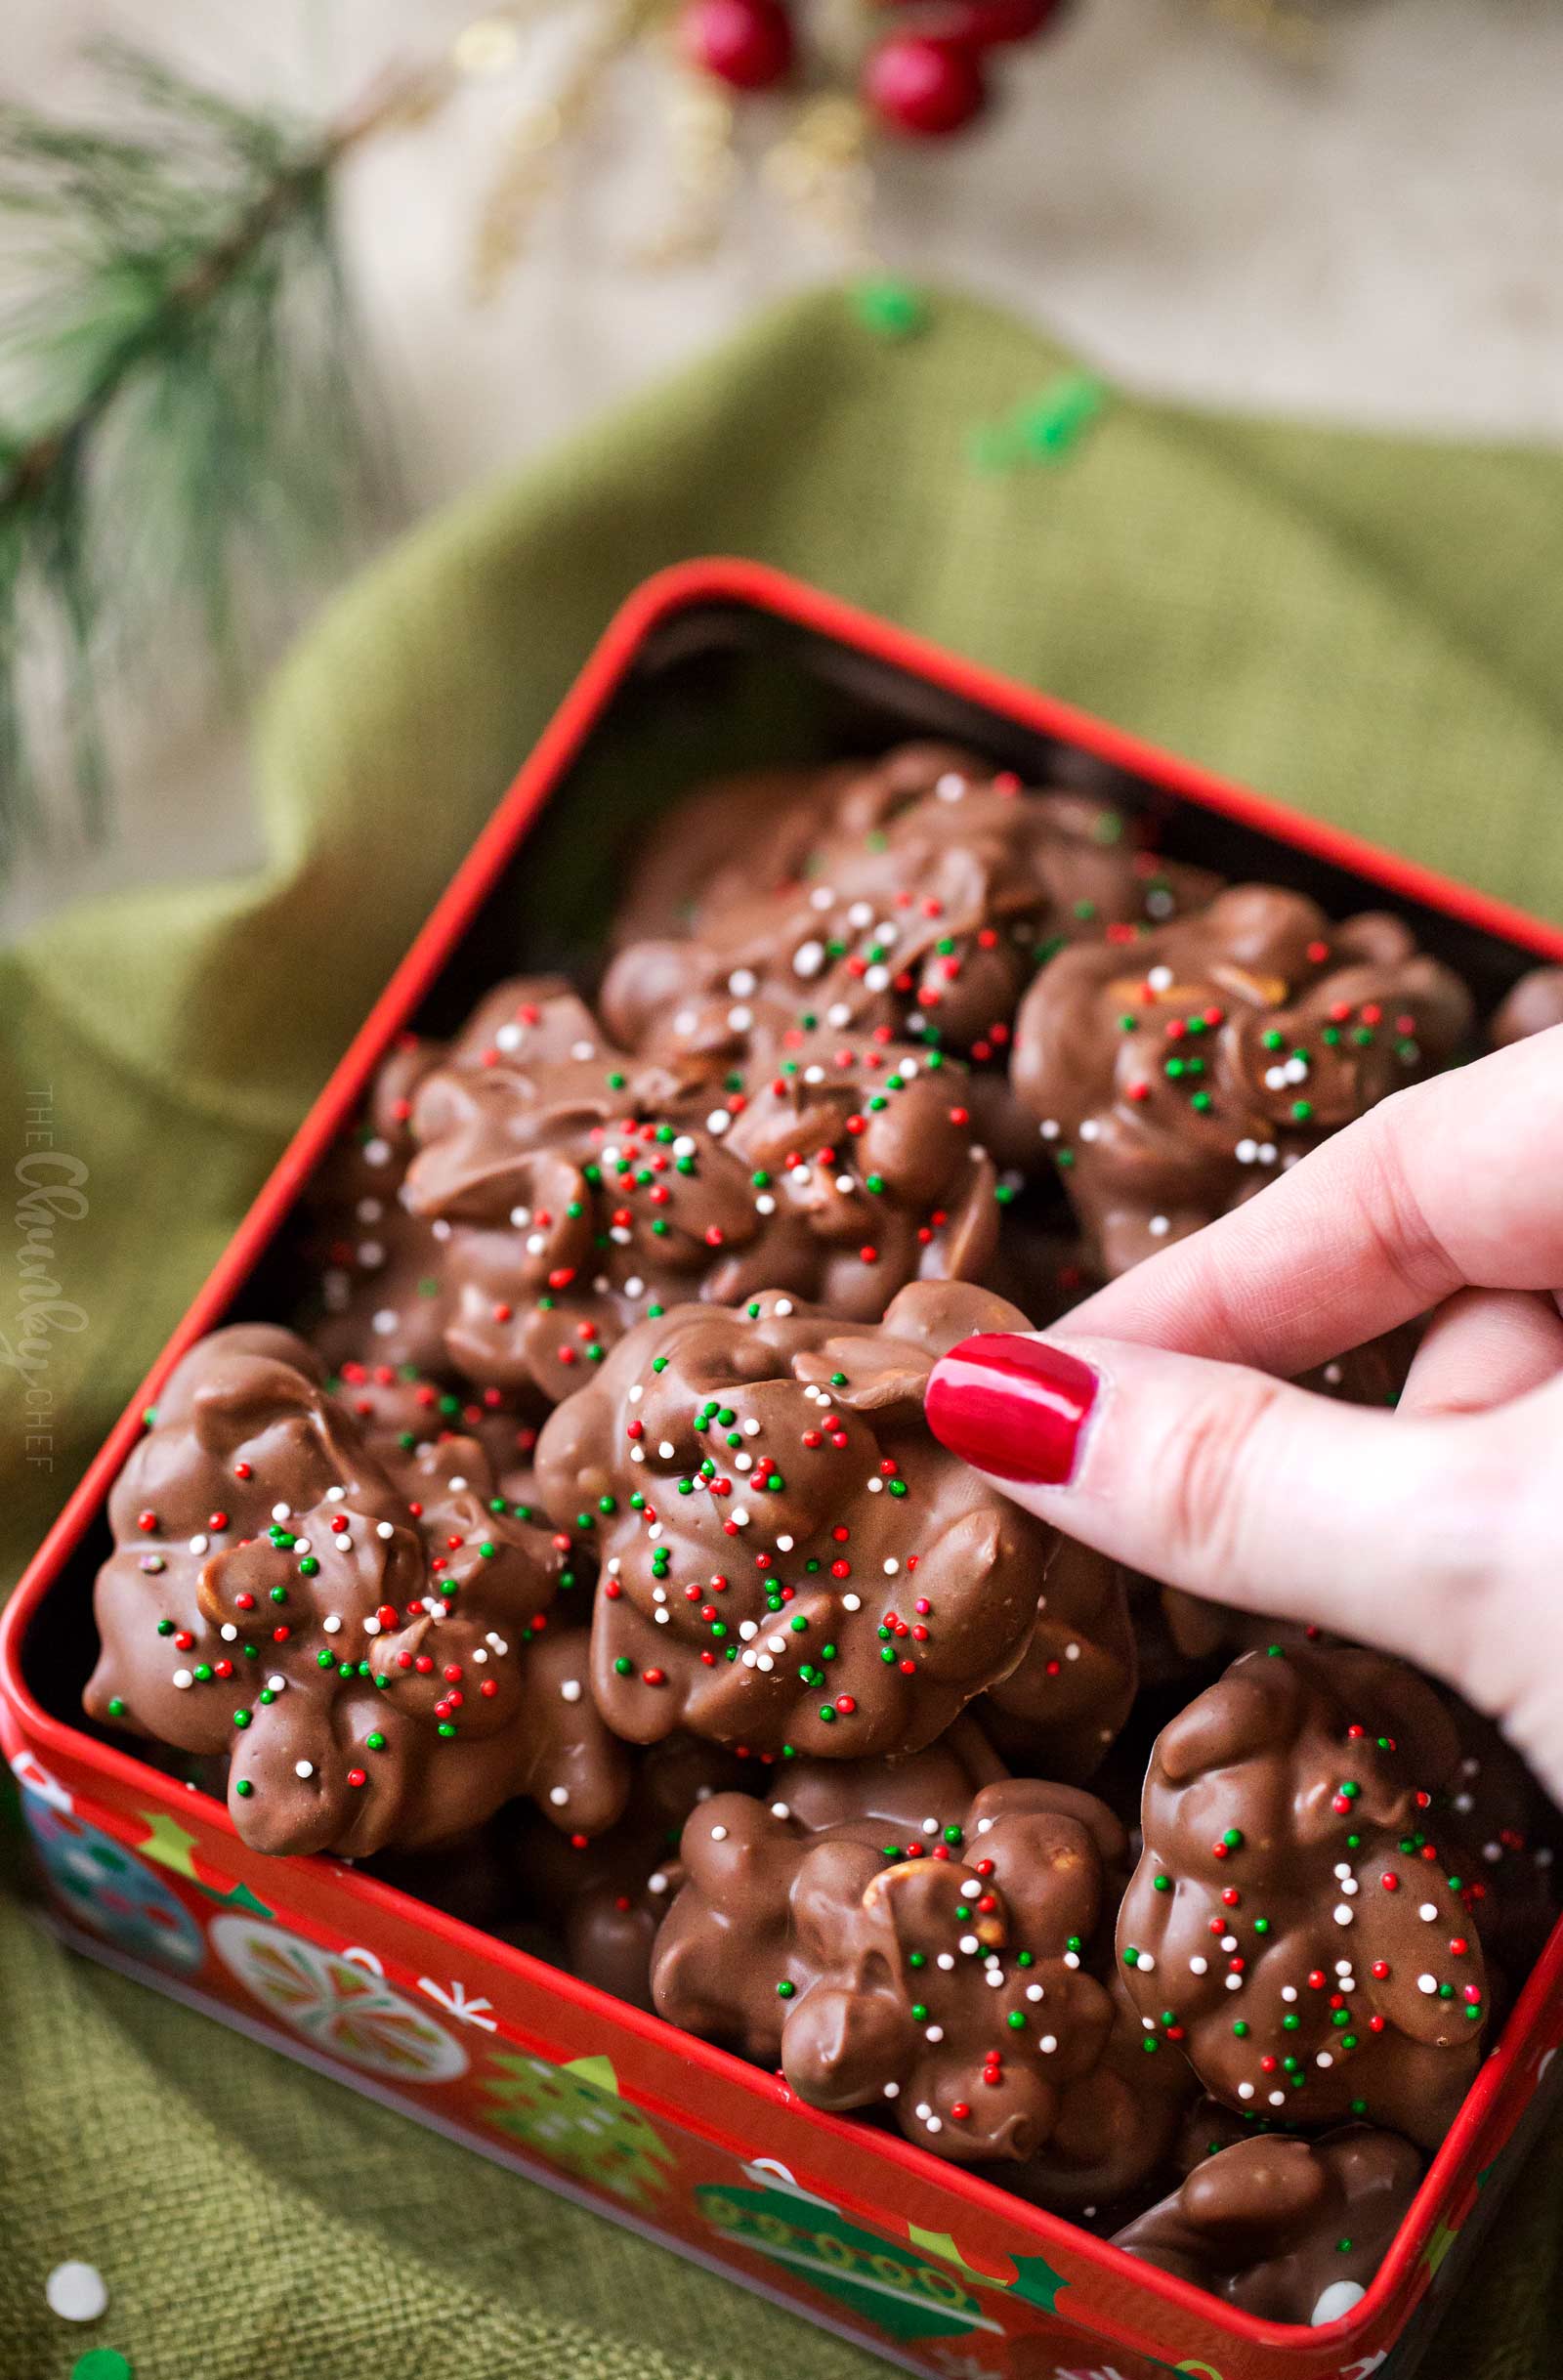 Crock Pot Candy for Christmas (5 Minutes Prep!) · Pint-sized Treasures